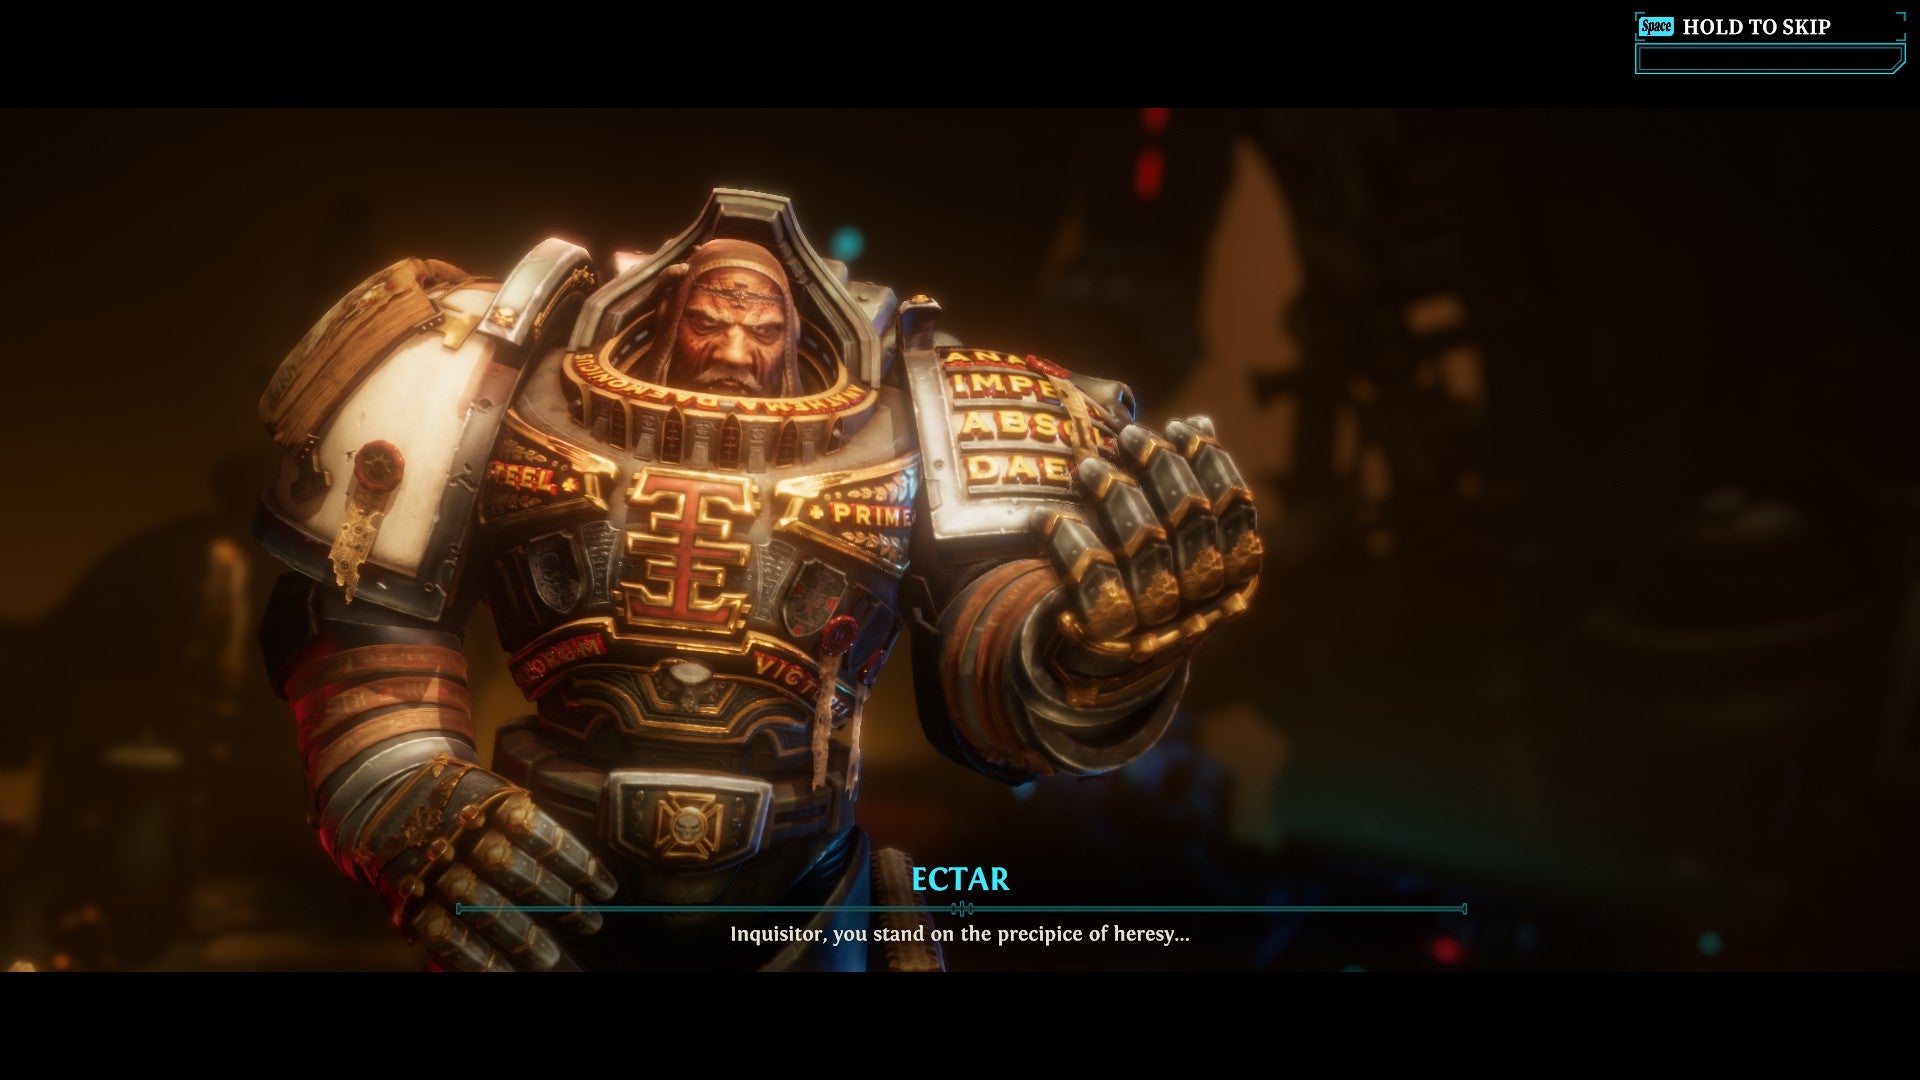 40K Chaos Gate Daemonhunters review - a cutscene shows Ectar in golden armour sternly saying 